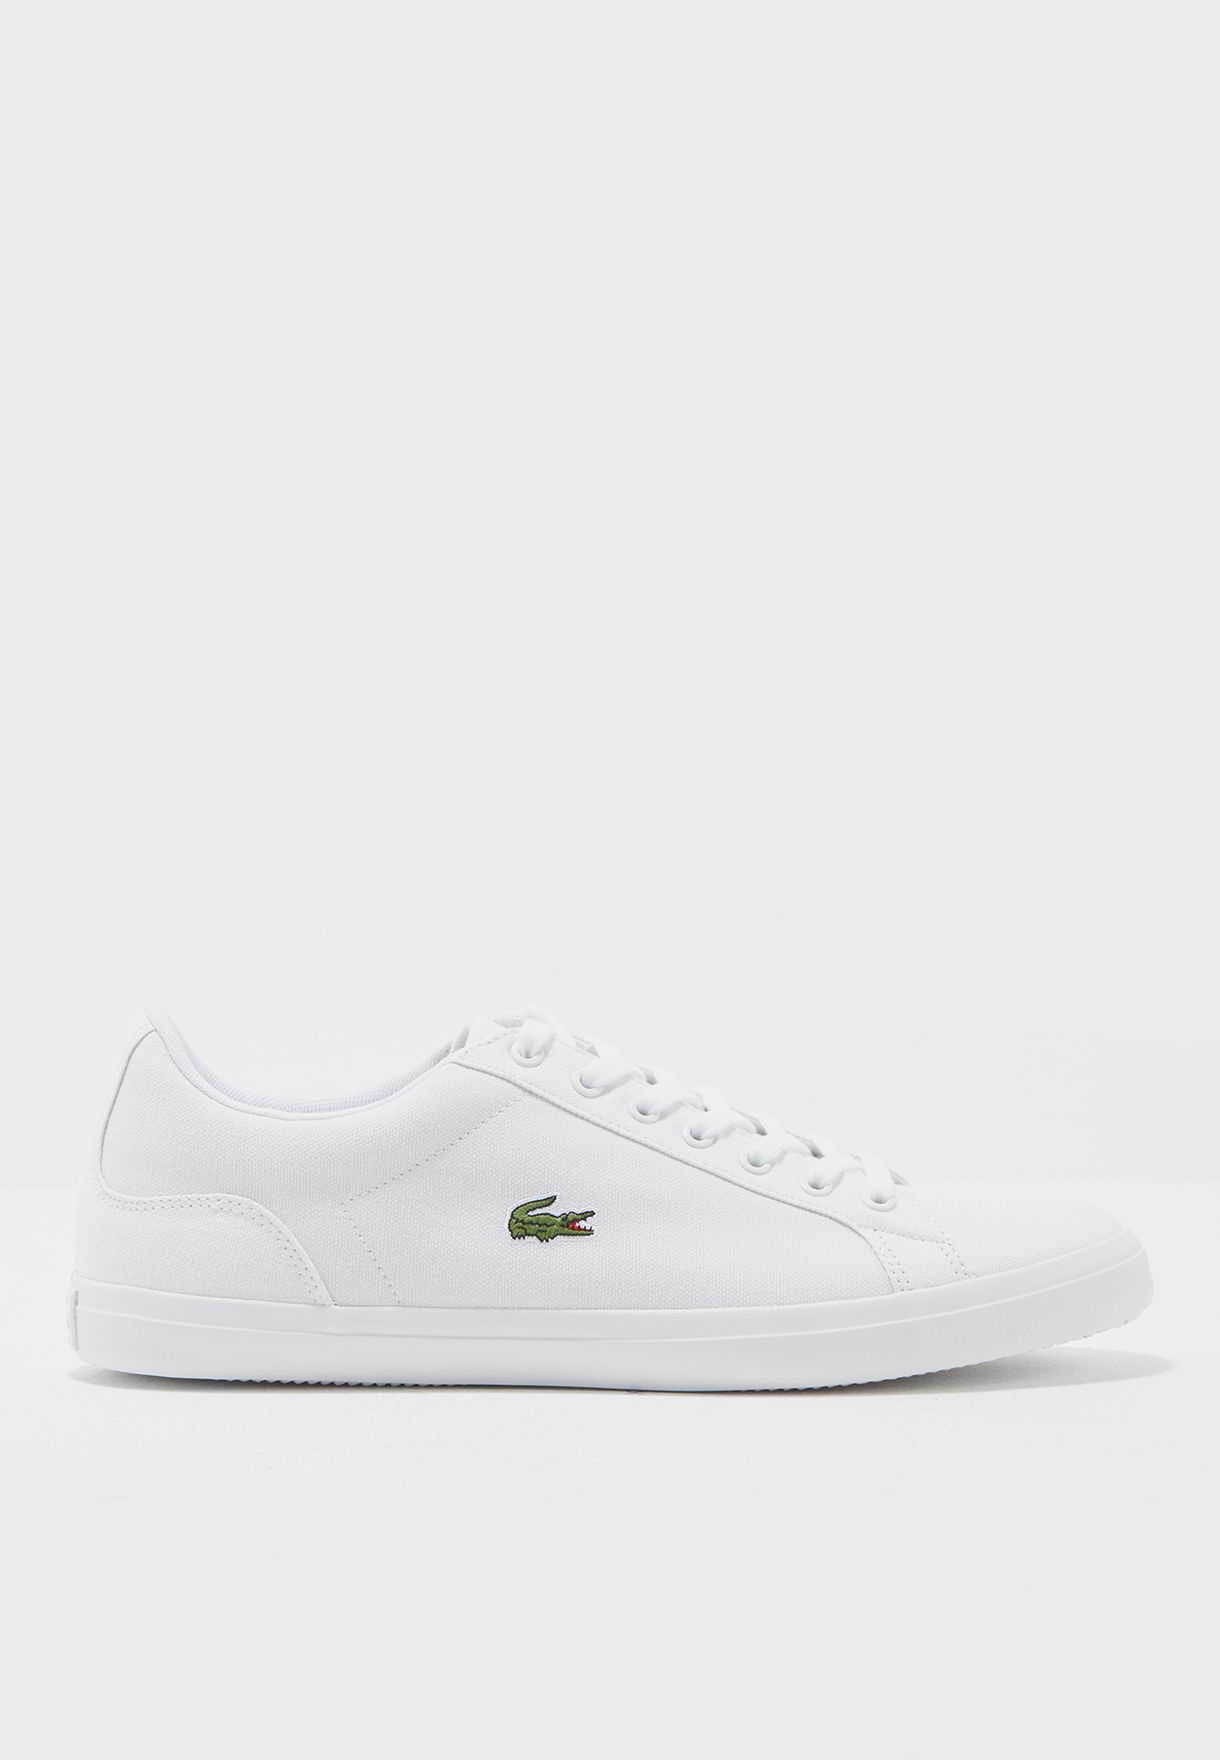 lacoste rose gold trainers